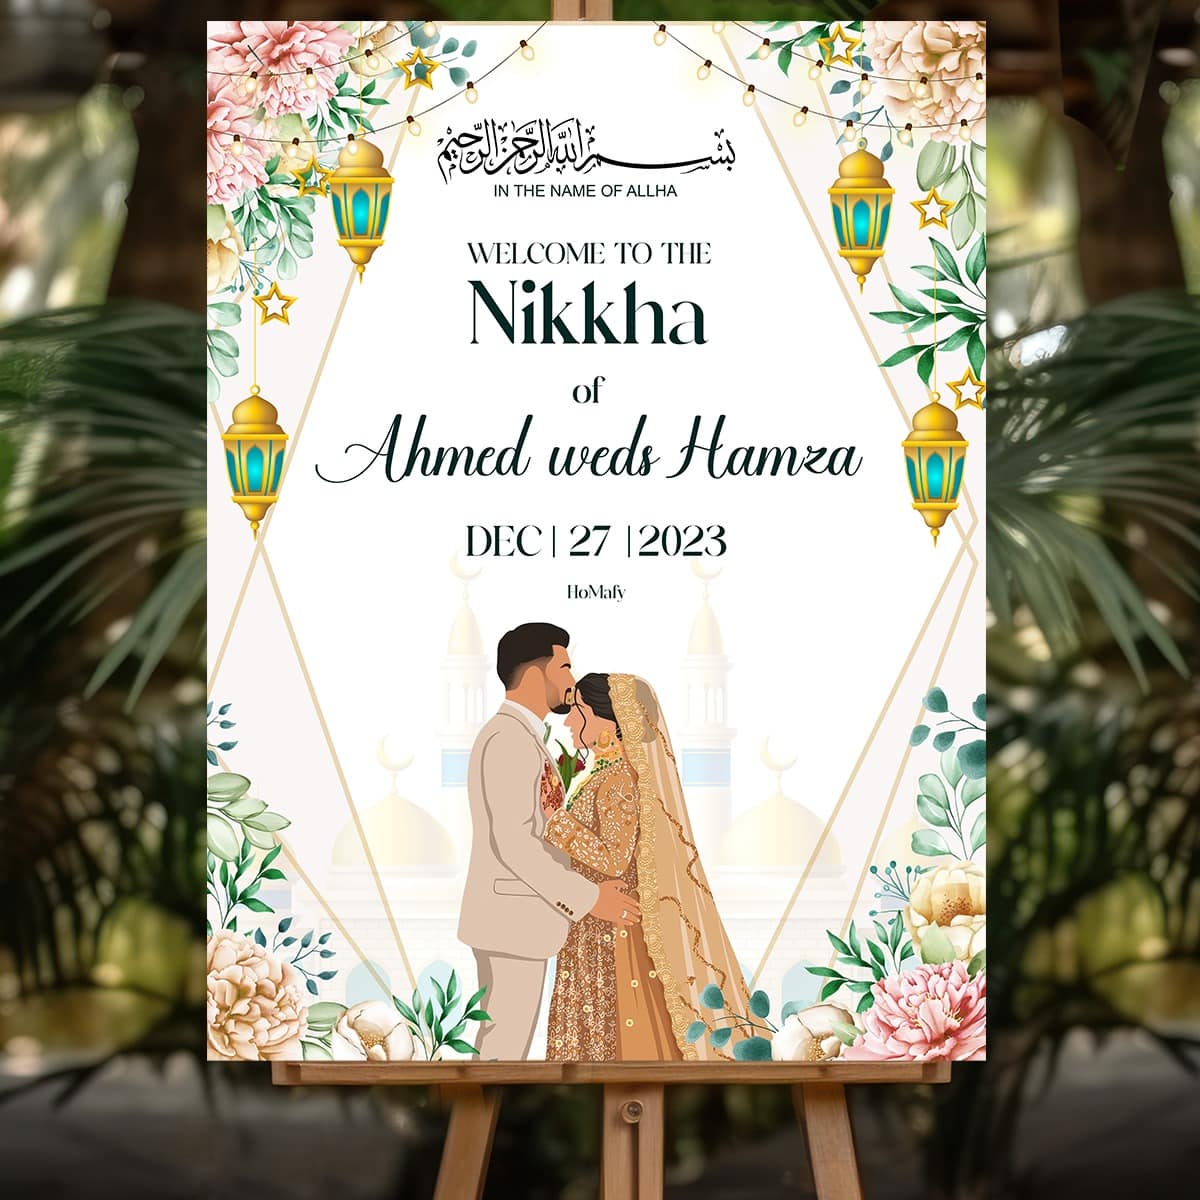 Nikah Ceremony: Things To Know About The Muslim Wedding - The Estate KL